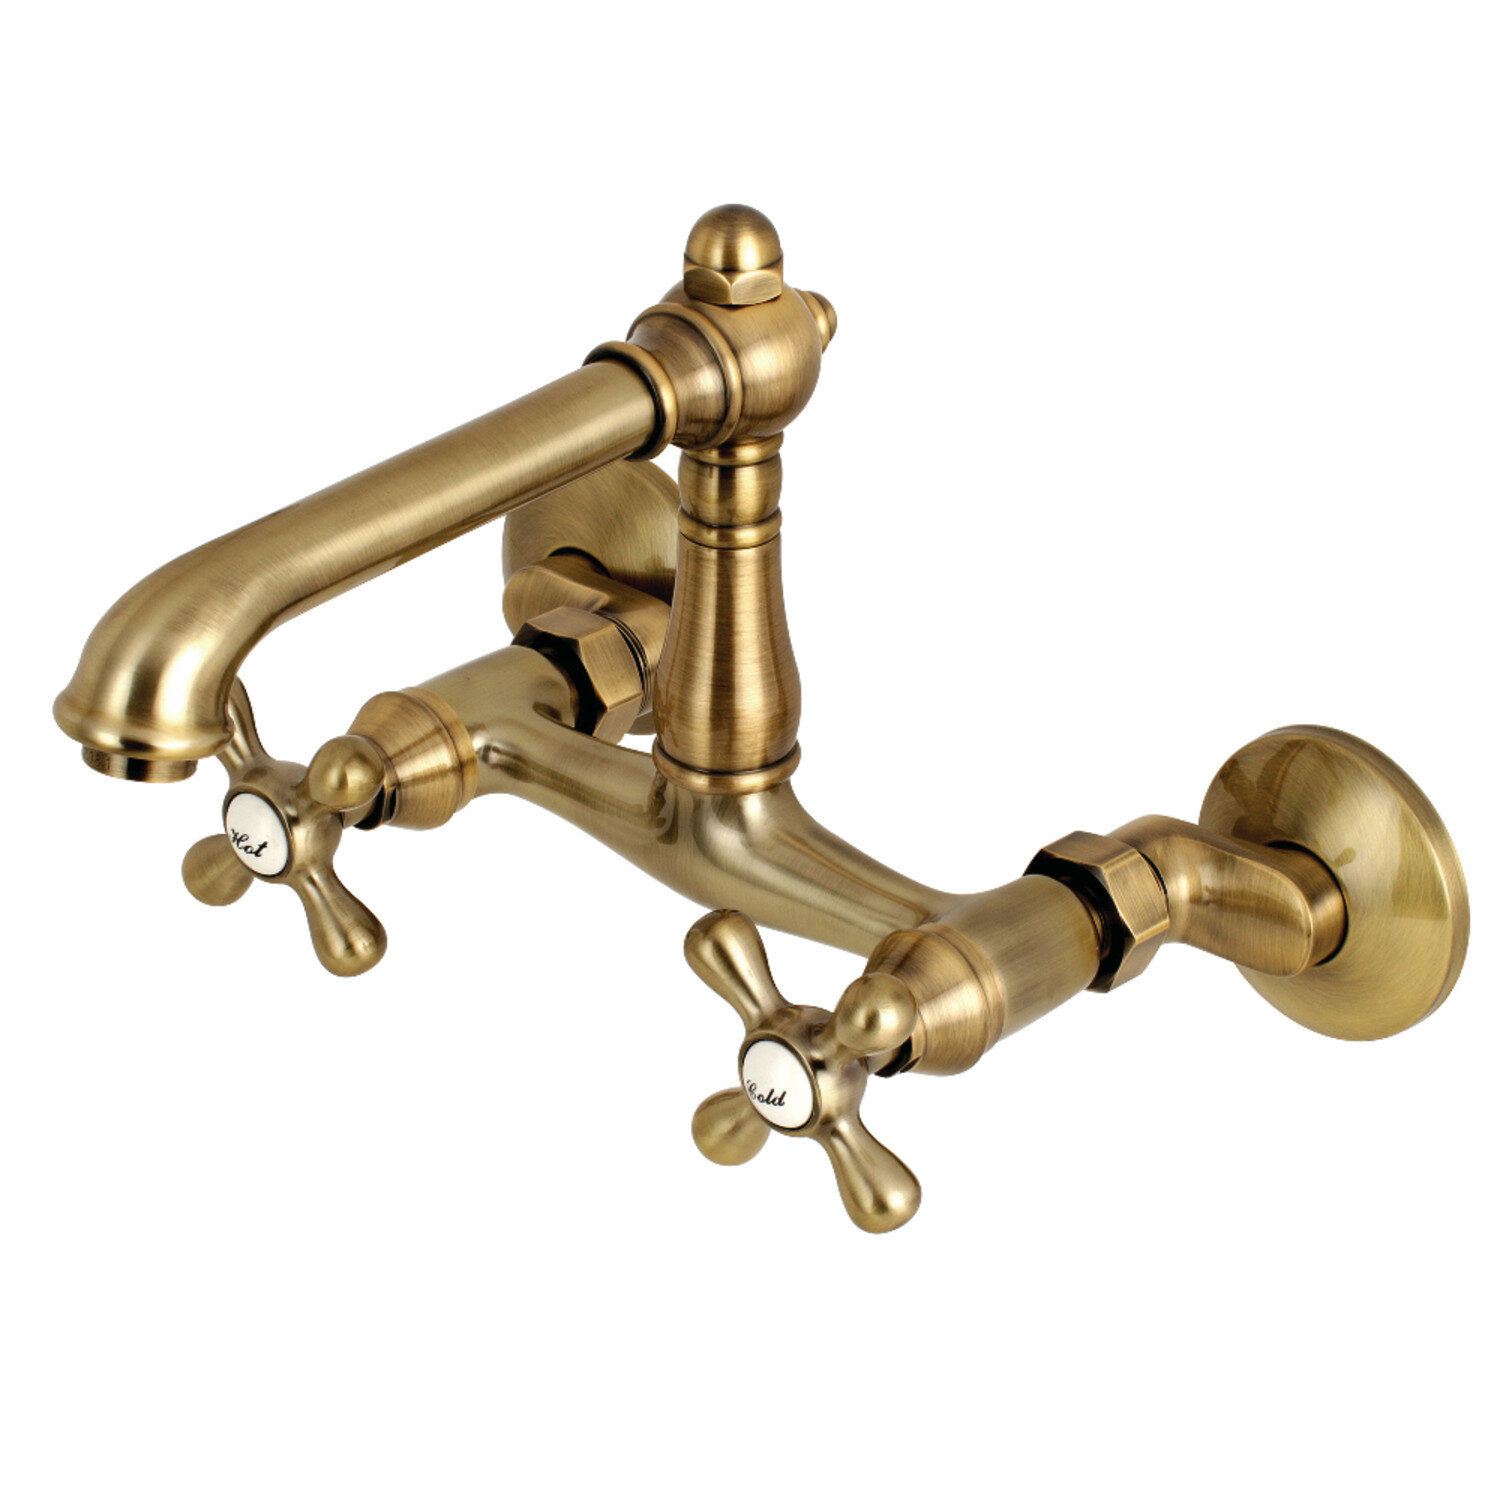 Kingston Brass English Country Adjustable Double Handle Kitchen Faucet Reviews Wayfair